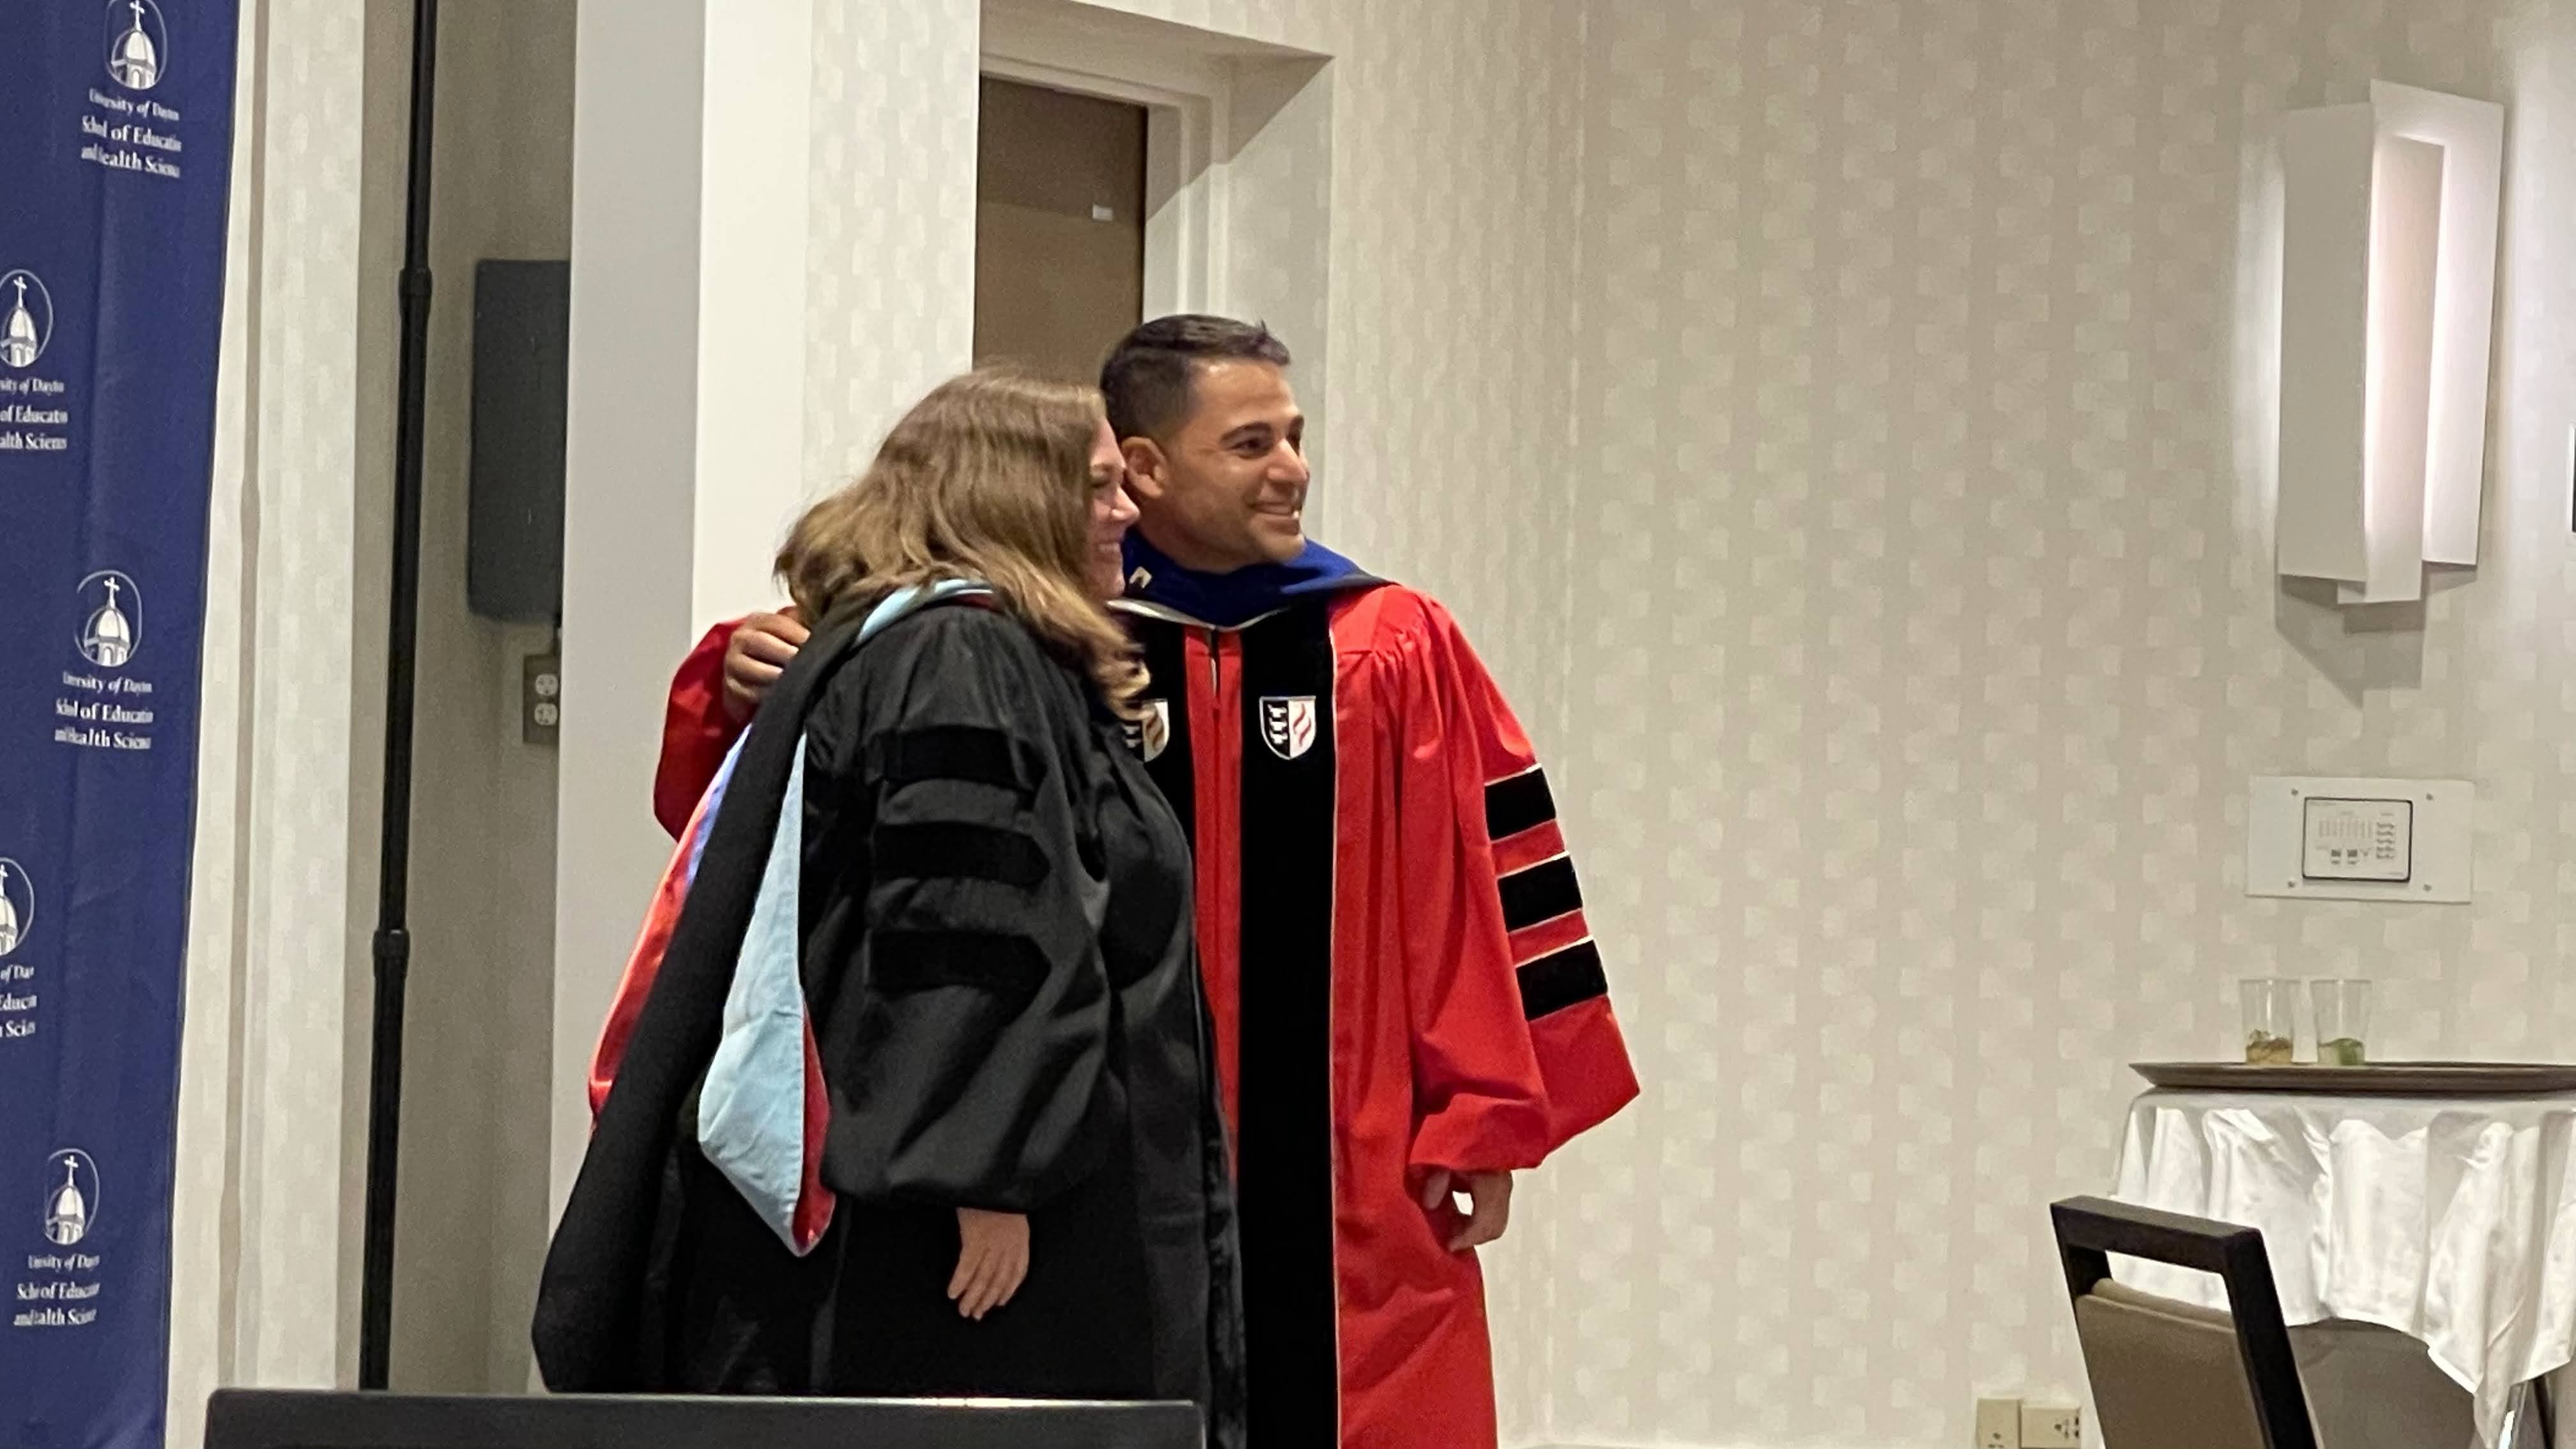 Dr. Witenstein takes a photo with a student after the hooding event.